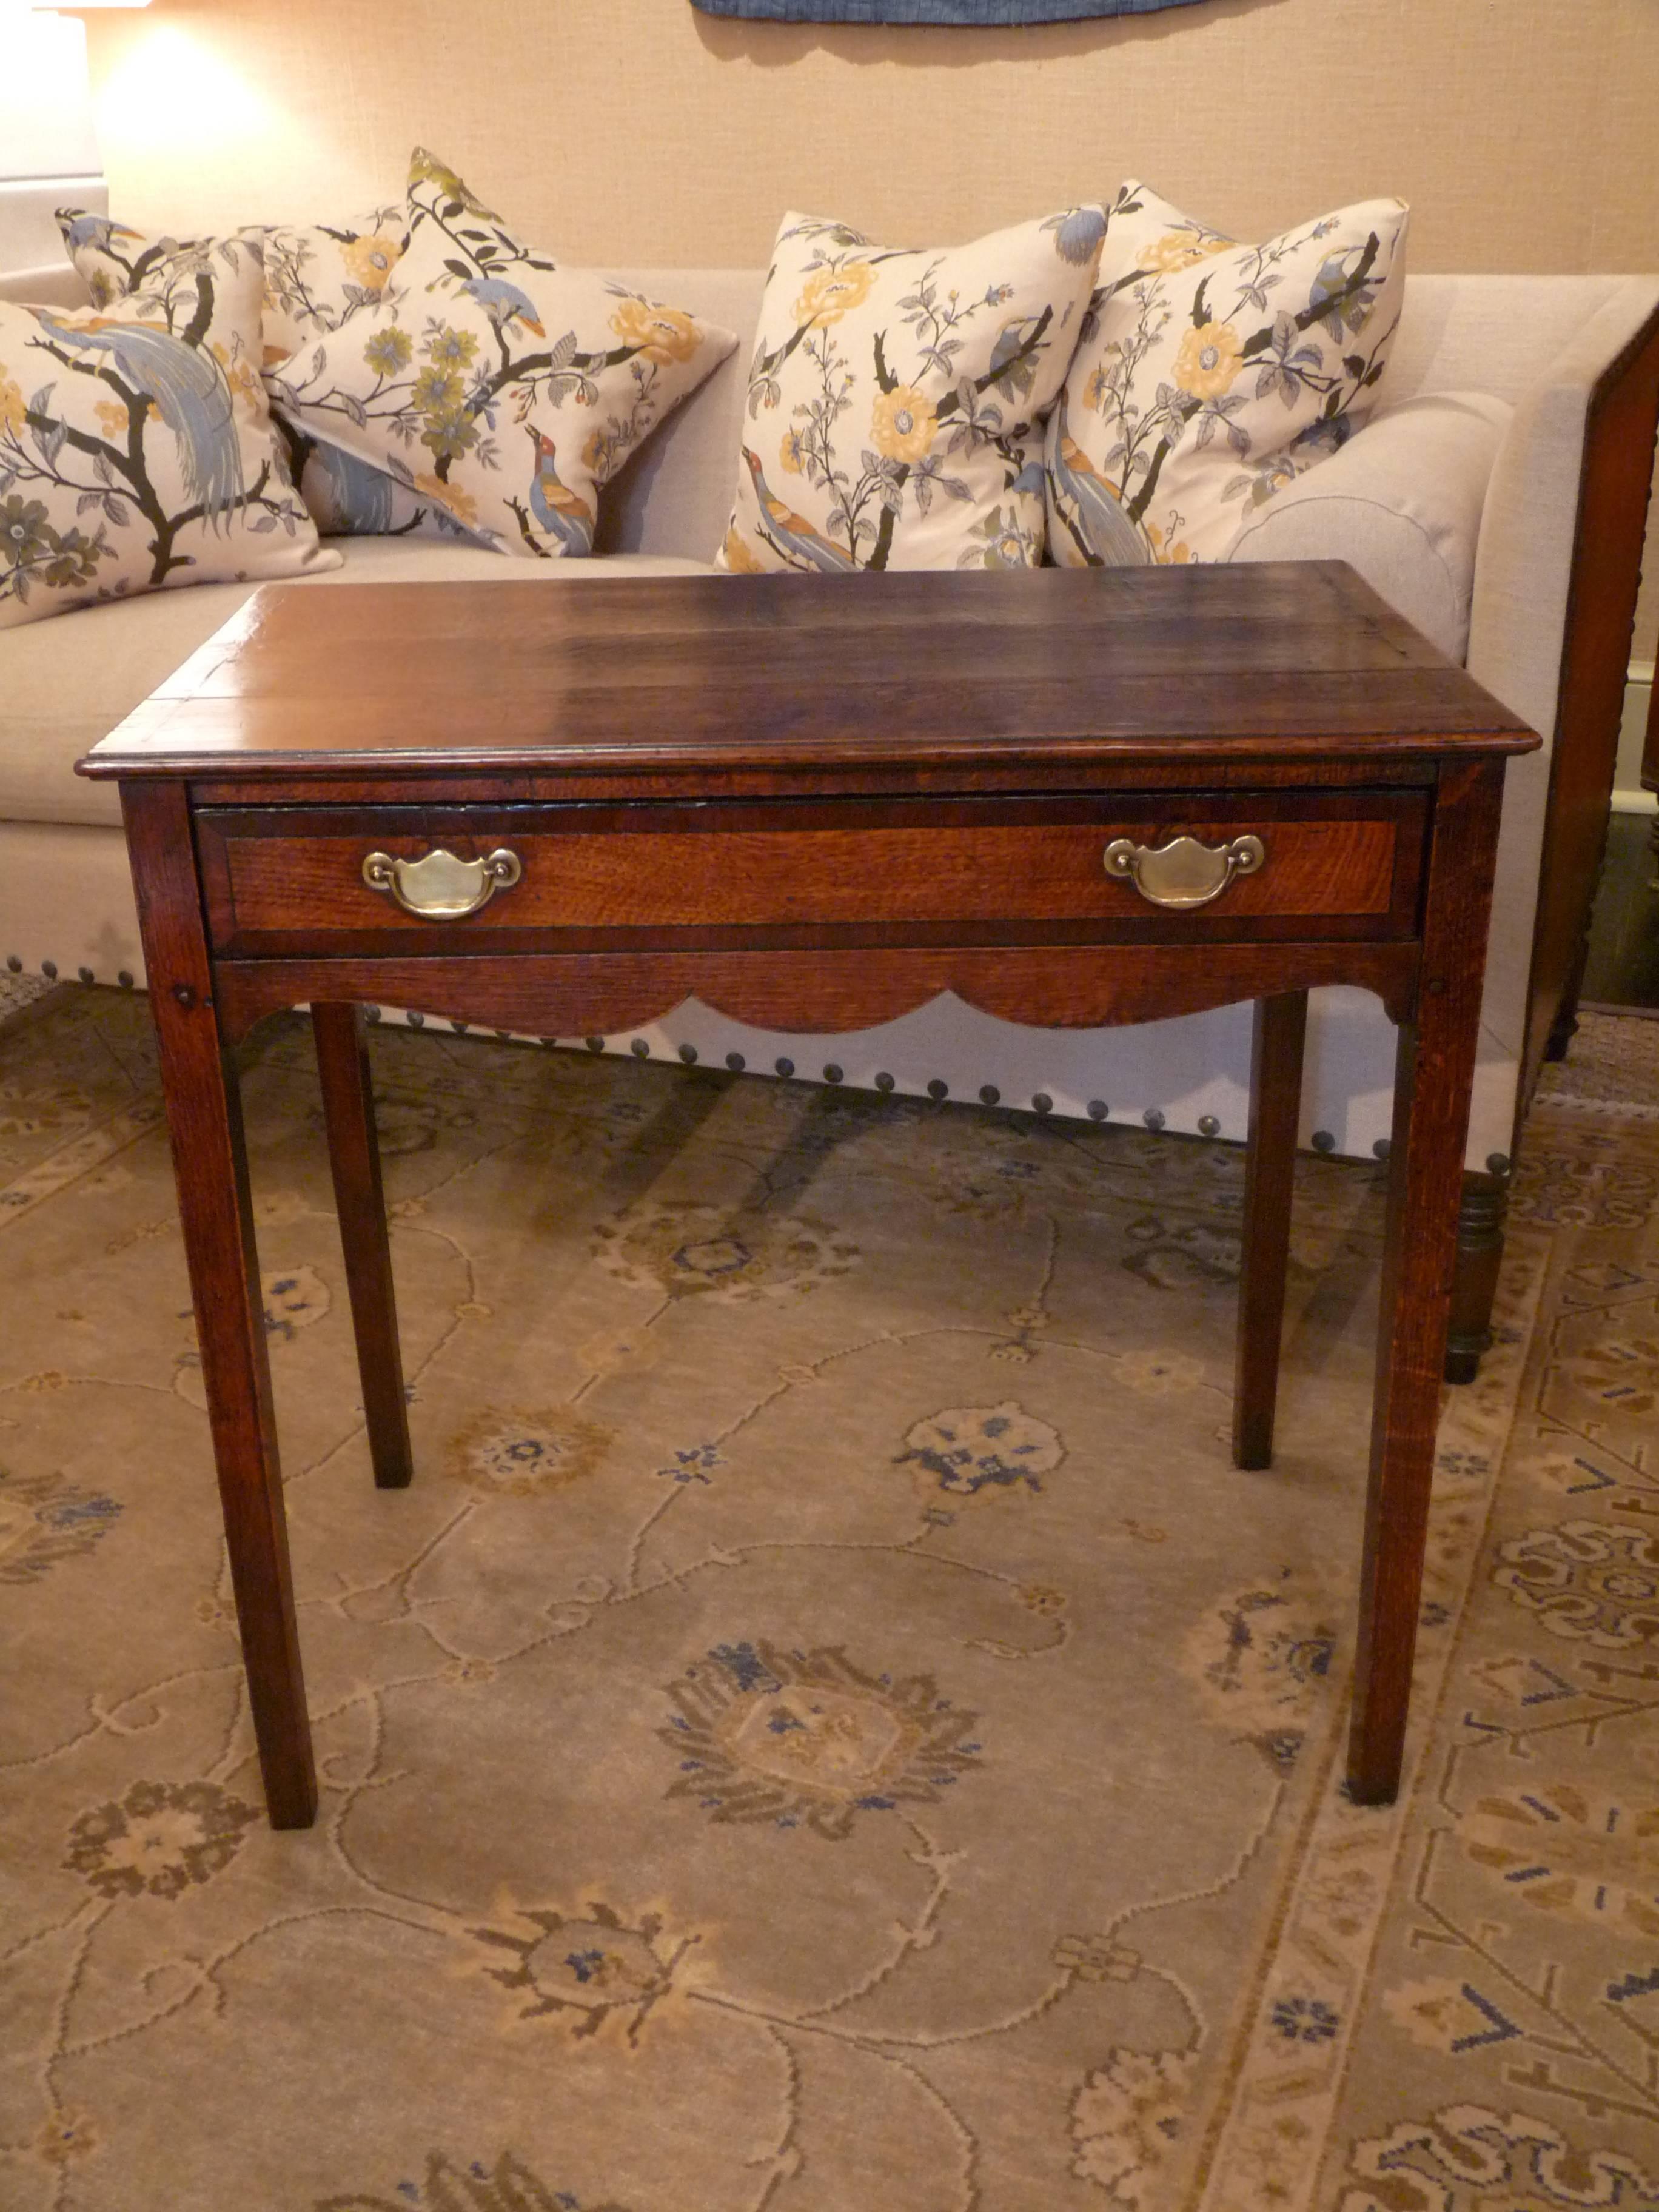  A very clean and elegant example of a fine English Georgian hall table. A single drawer, original brass hardware and a scalloped apron front. Beautiful patina.